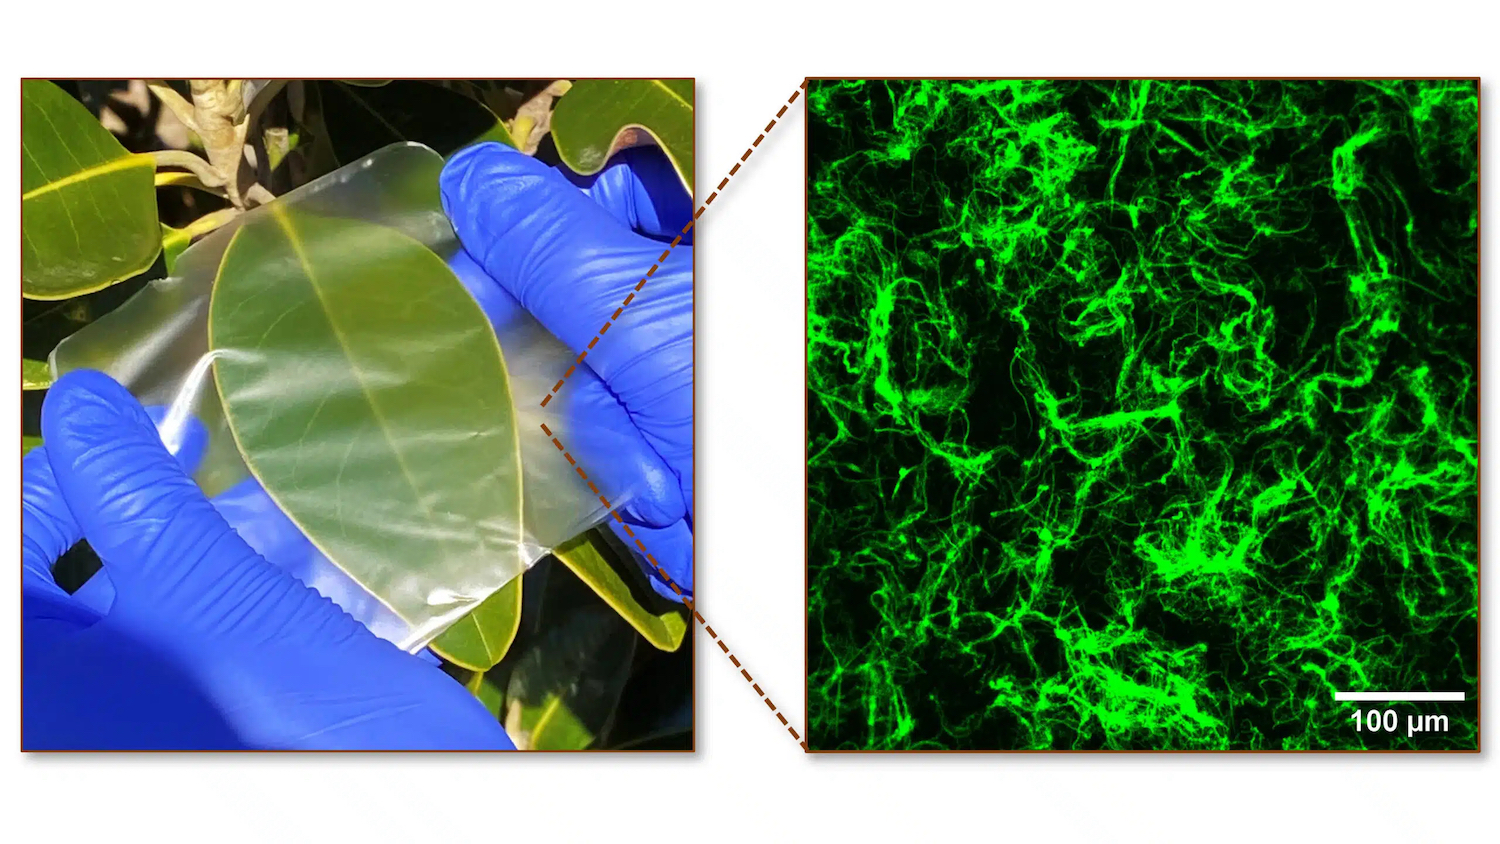 The biocomposite films look similar to many synthetic plastics (left), however, their structure is hierarchically reinforced as seen in the fluorescence microscopy image (right). Photo courtesy of Orlin Velev, NC State University.